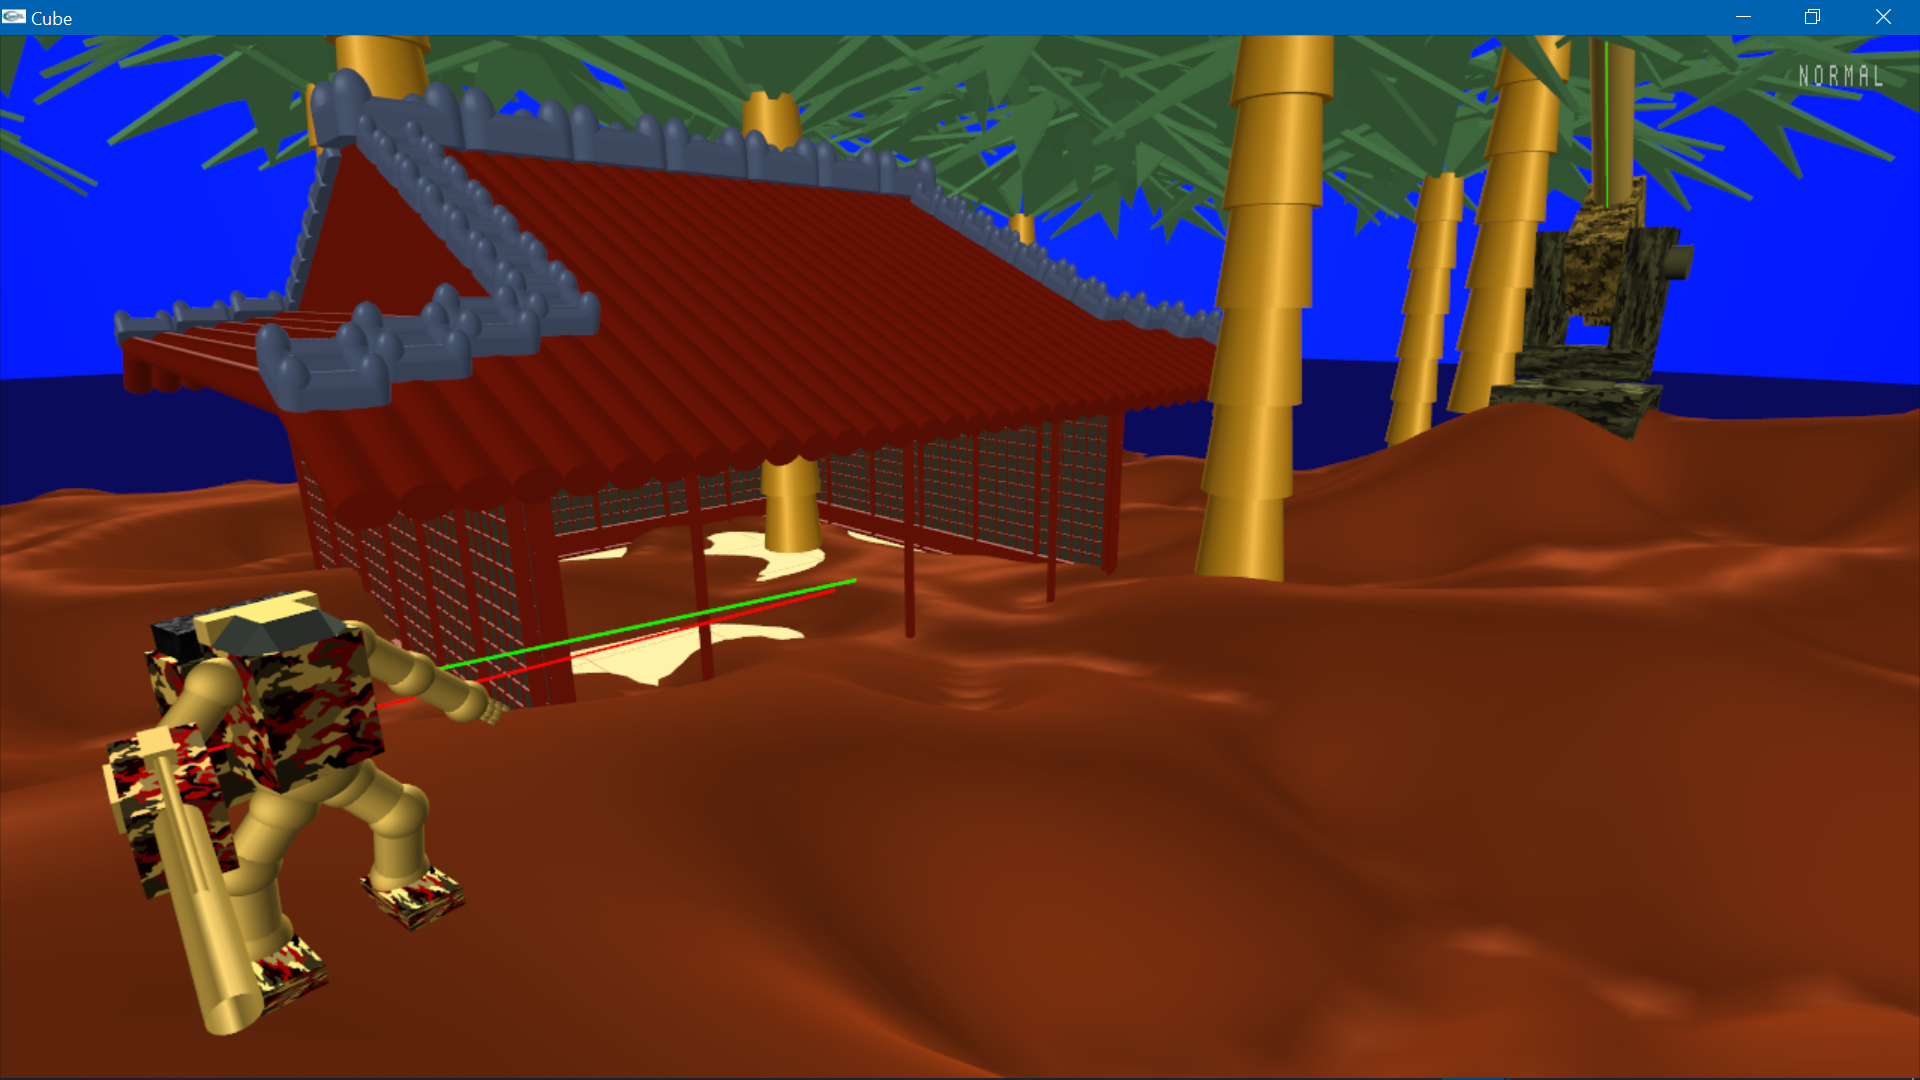 OpenGL scene with character, dojo and palm trees